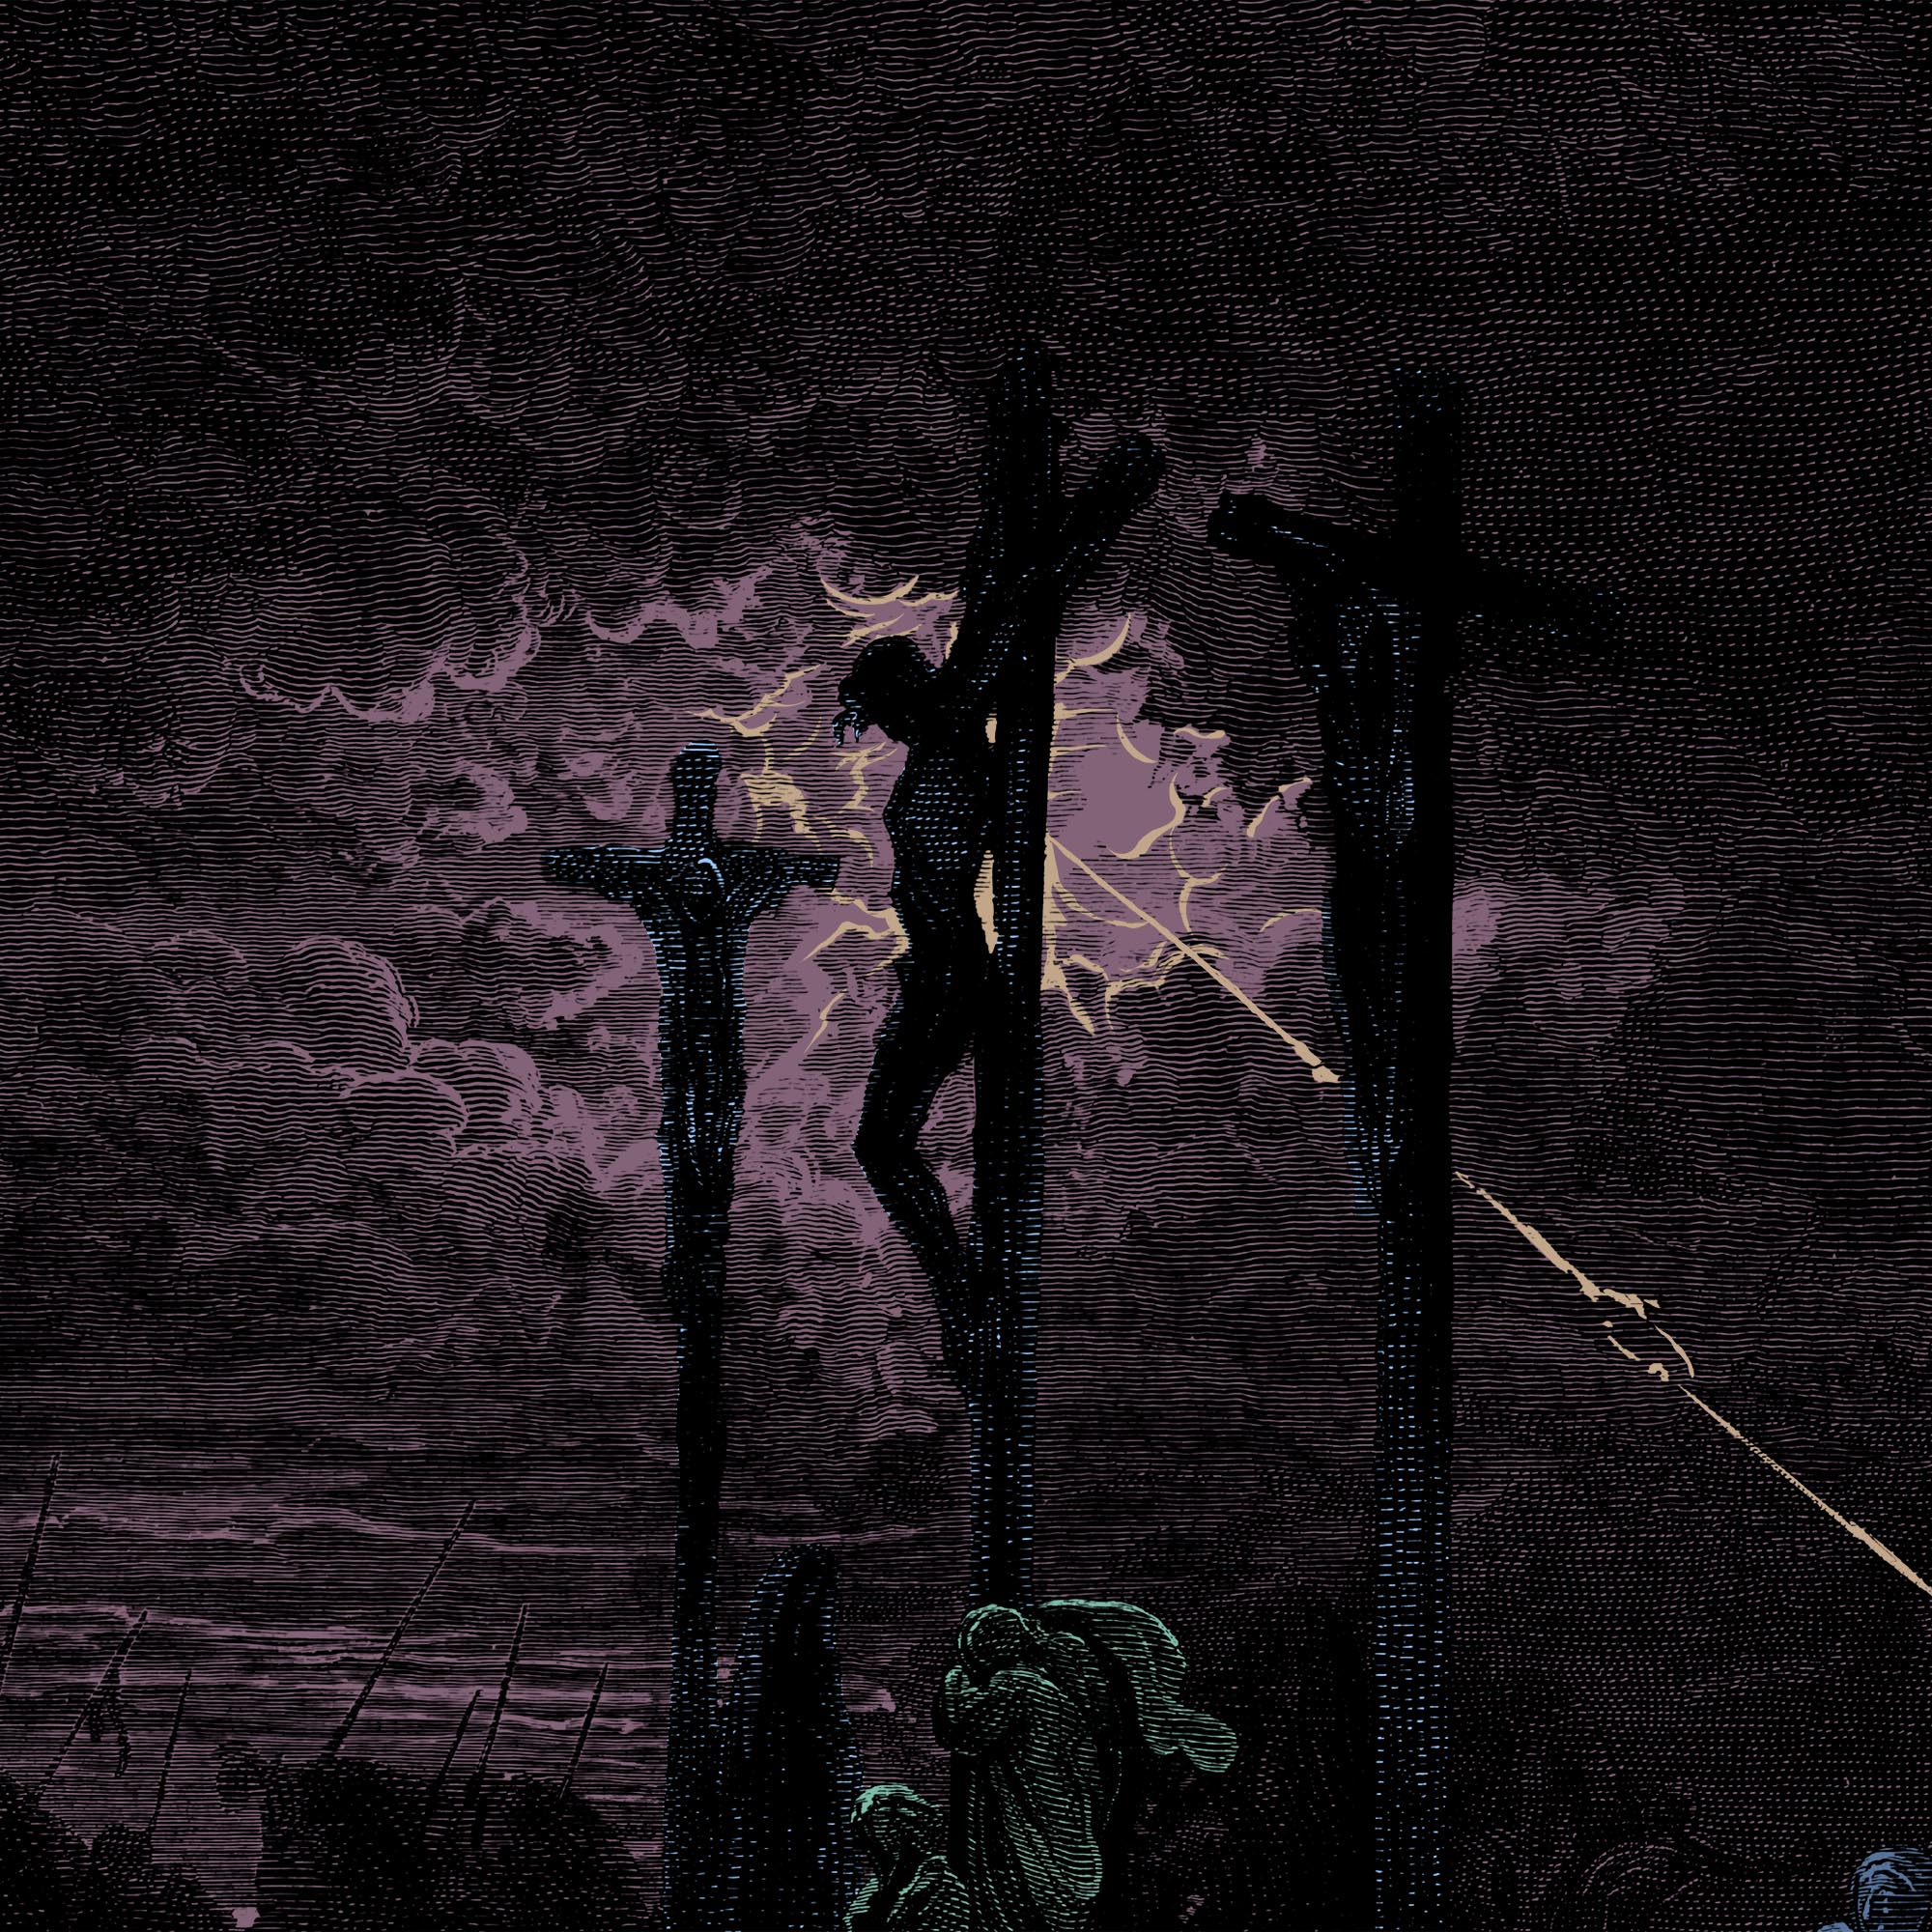 Fine art Darkness at the Crucifixion | Gustave Dore Paradise Lost, Dante | Surreal Full Color Eerie Christ Fine Art Print